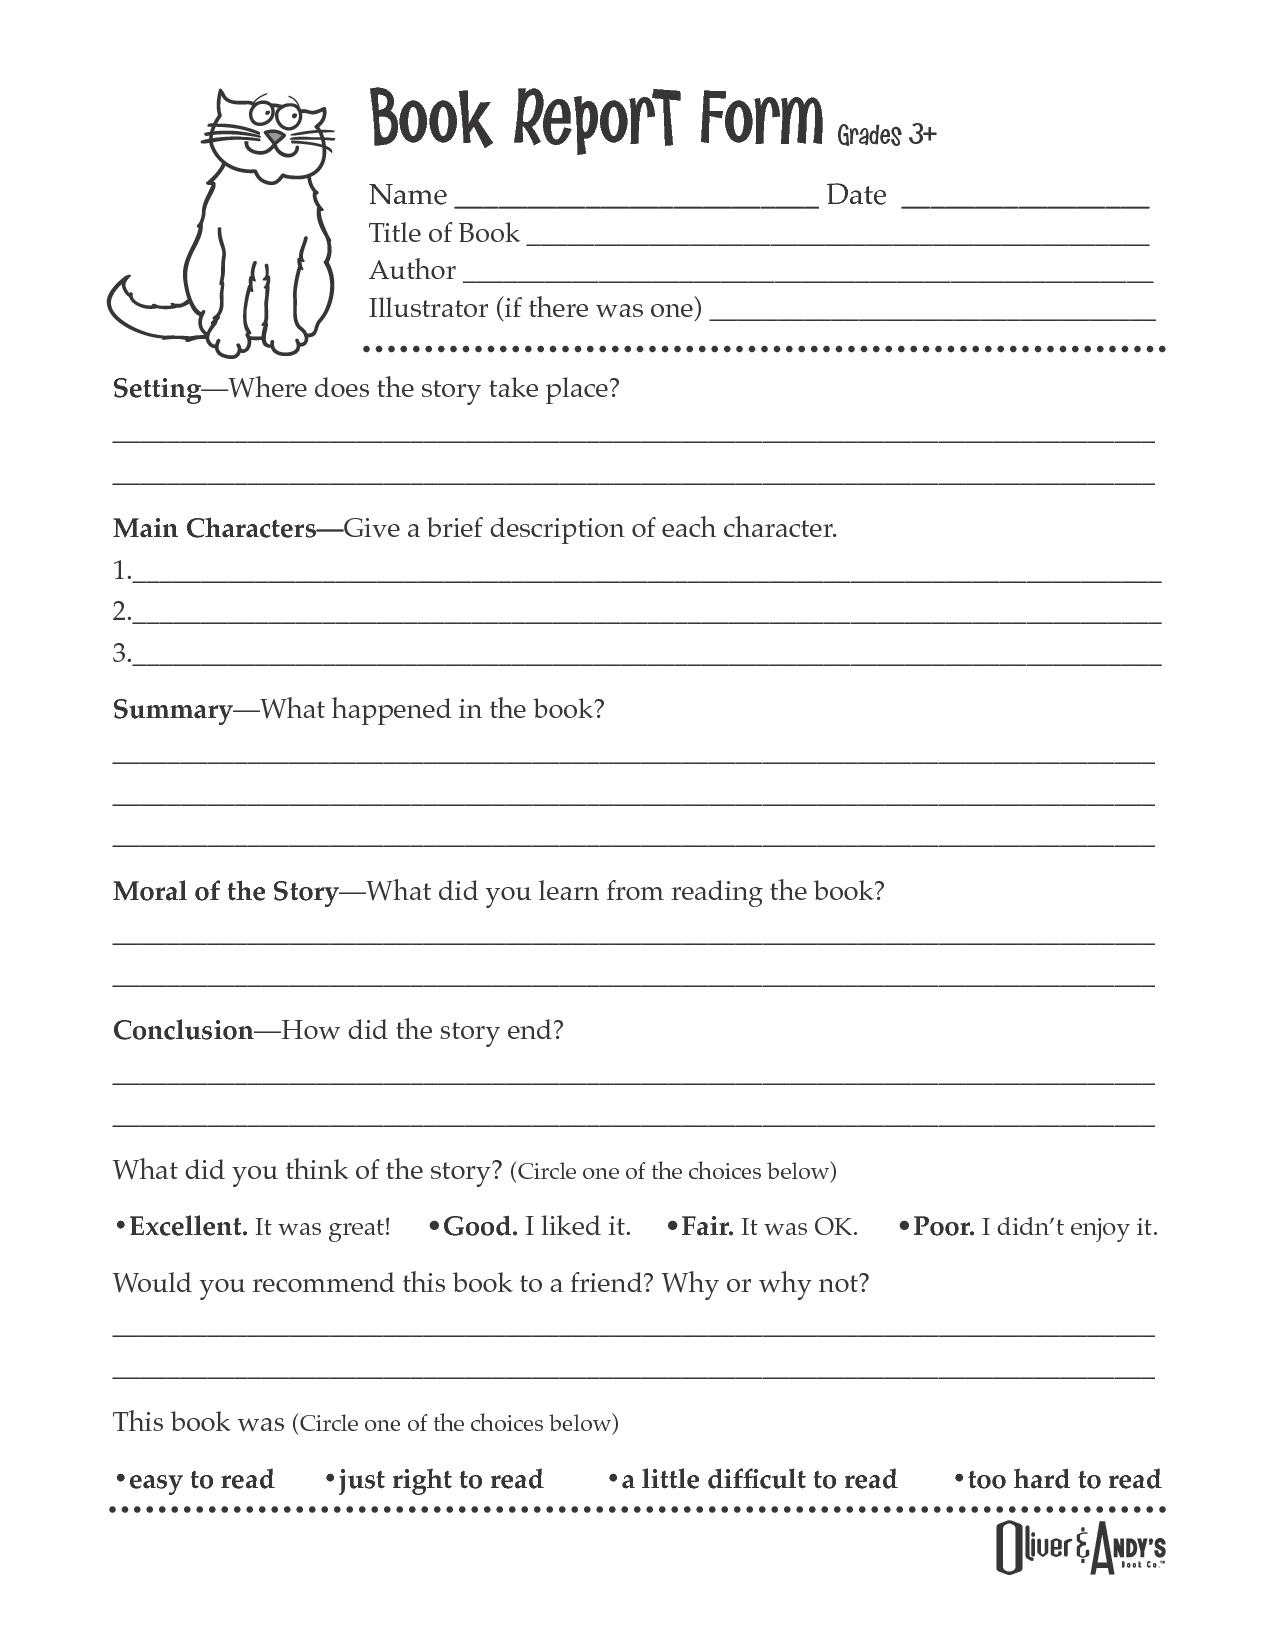 second-grade-book-report-template-book-report-form-grades-pertaining-to